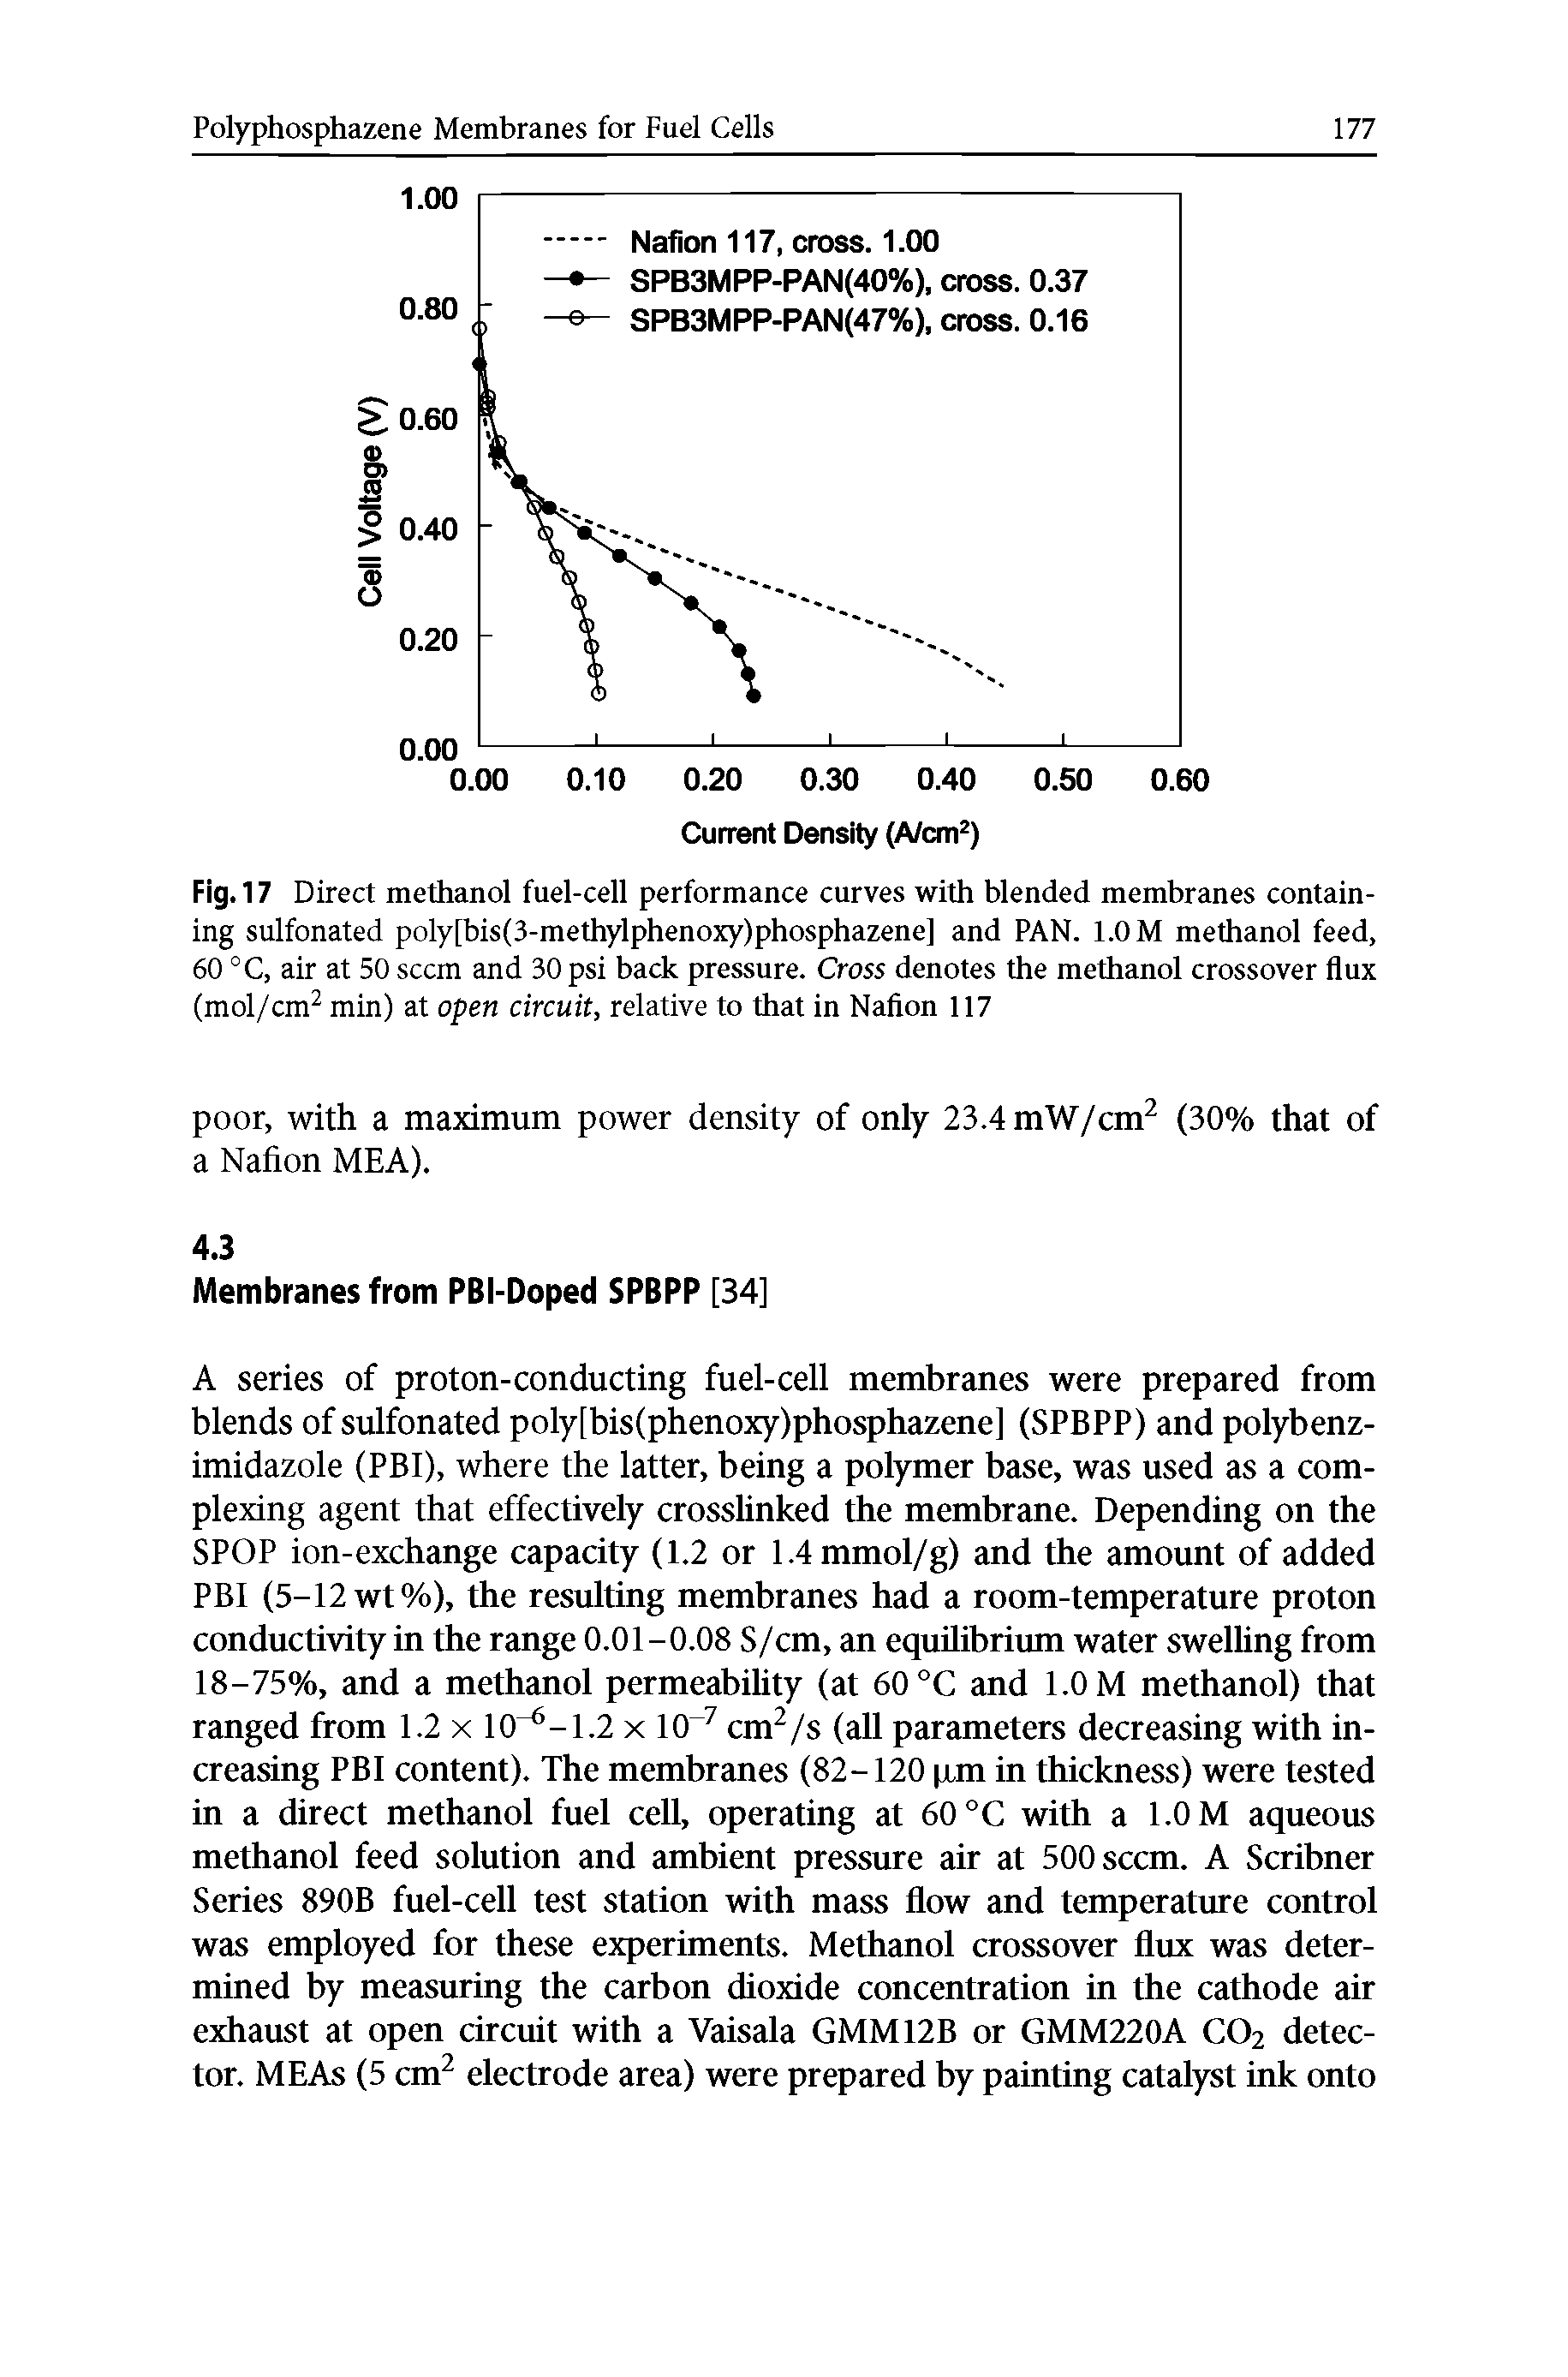 Fig. 17 Direct methanol fuel-cell performance curves with blended membranes containing sulfonated poly[bis(3-methylphenoxy)phosphazene] and PAN. 1.0 M methanol feed, 60 °C, air at 50 seem and 30psi back pressure. Cross denotes the methanol crossover flux (mol/cm min) at open circuit, relative to that in Nafion 117...